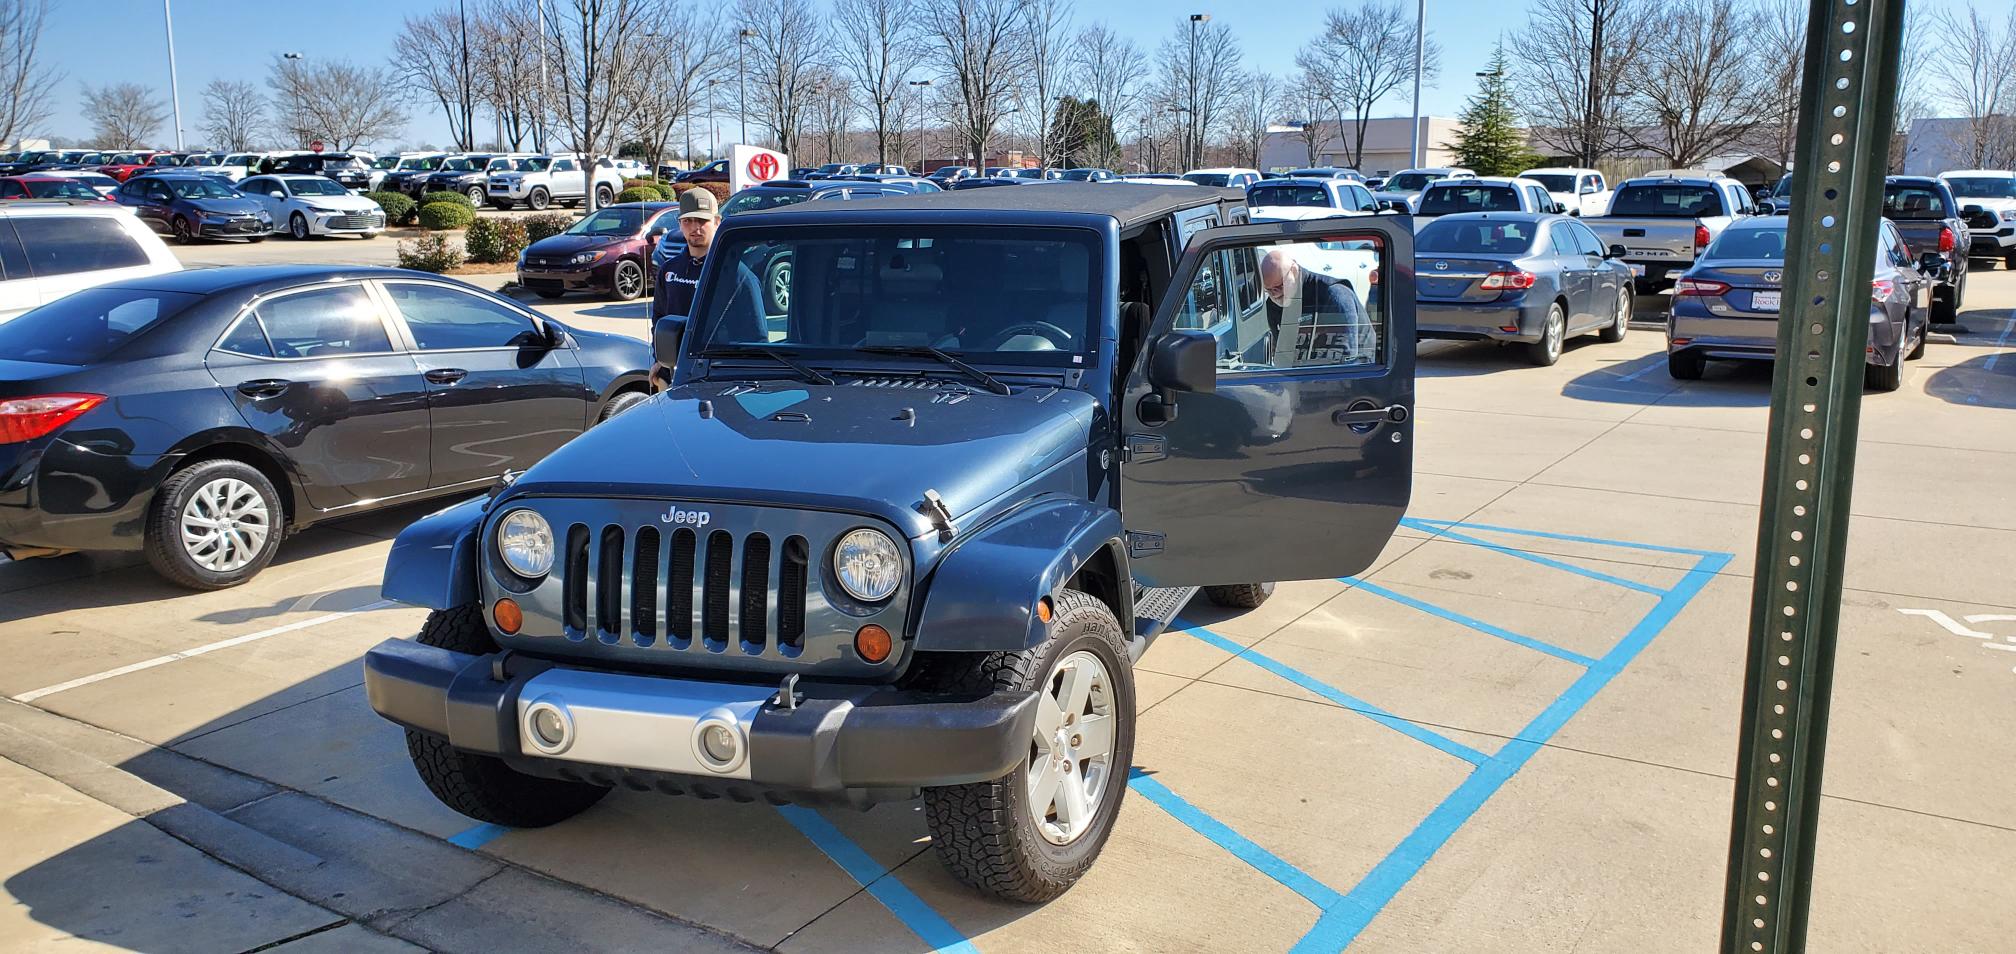 Used Jeep Wrangler for Sale in Beaufort, SC Under $10,000 